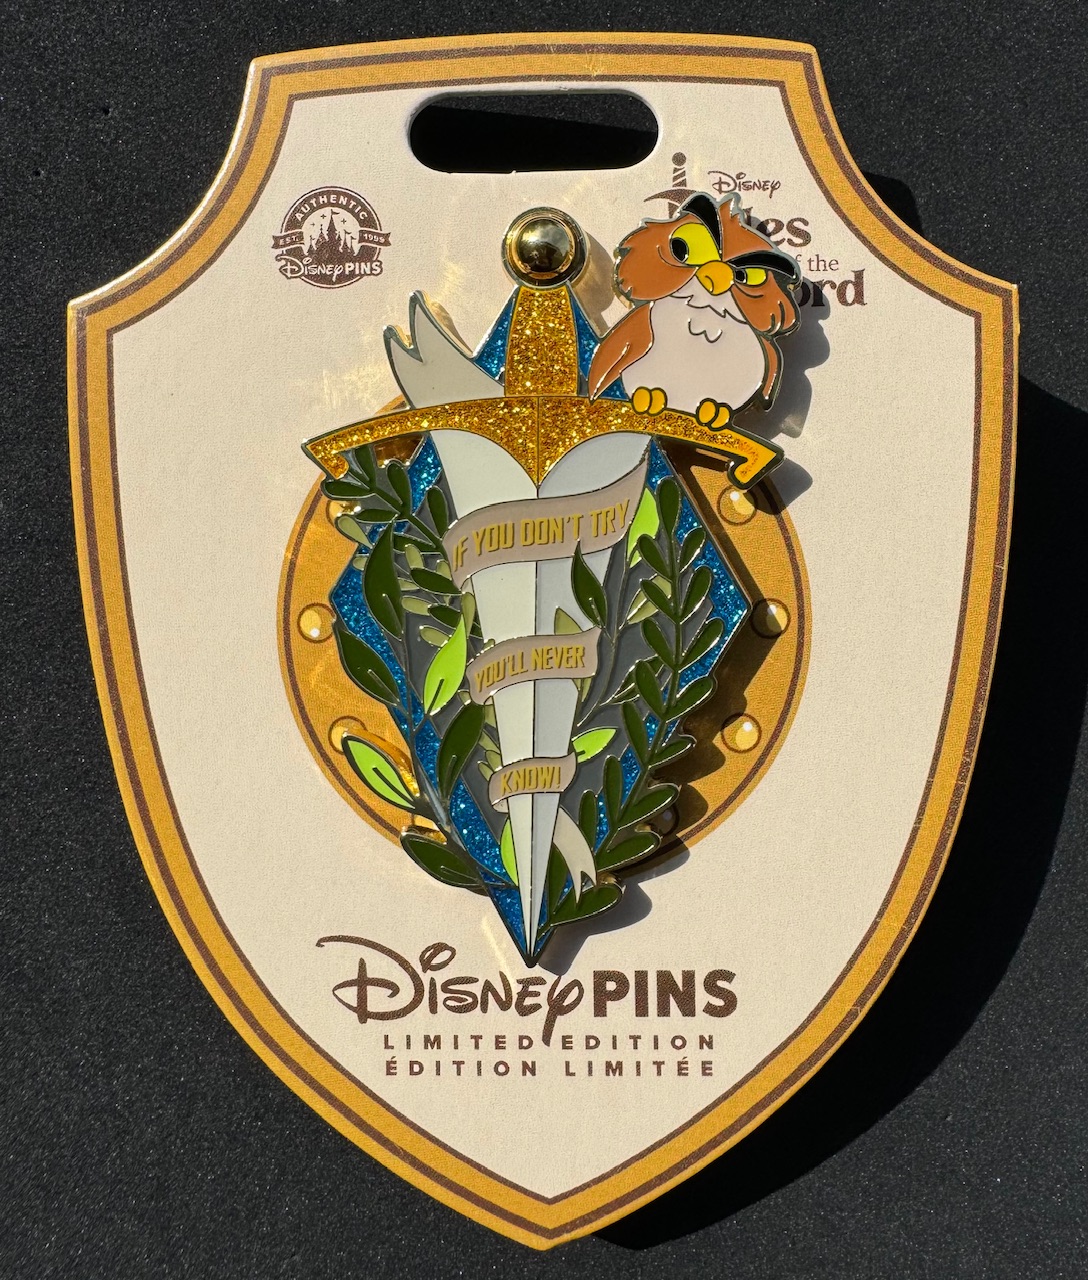 Archimedes Tales of the Sword Disney Pin